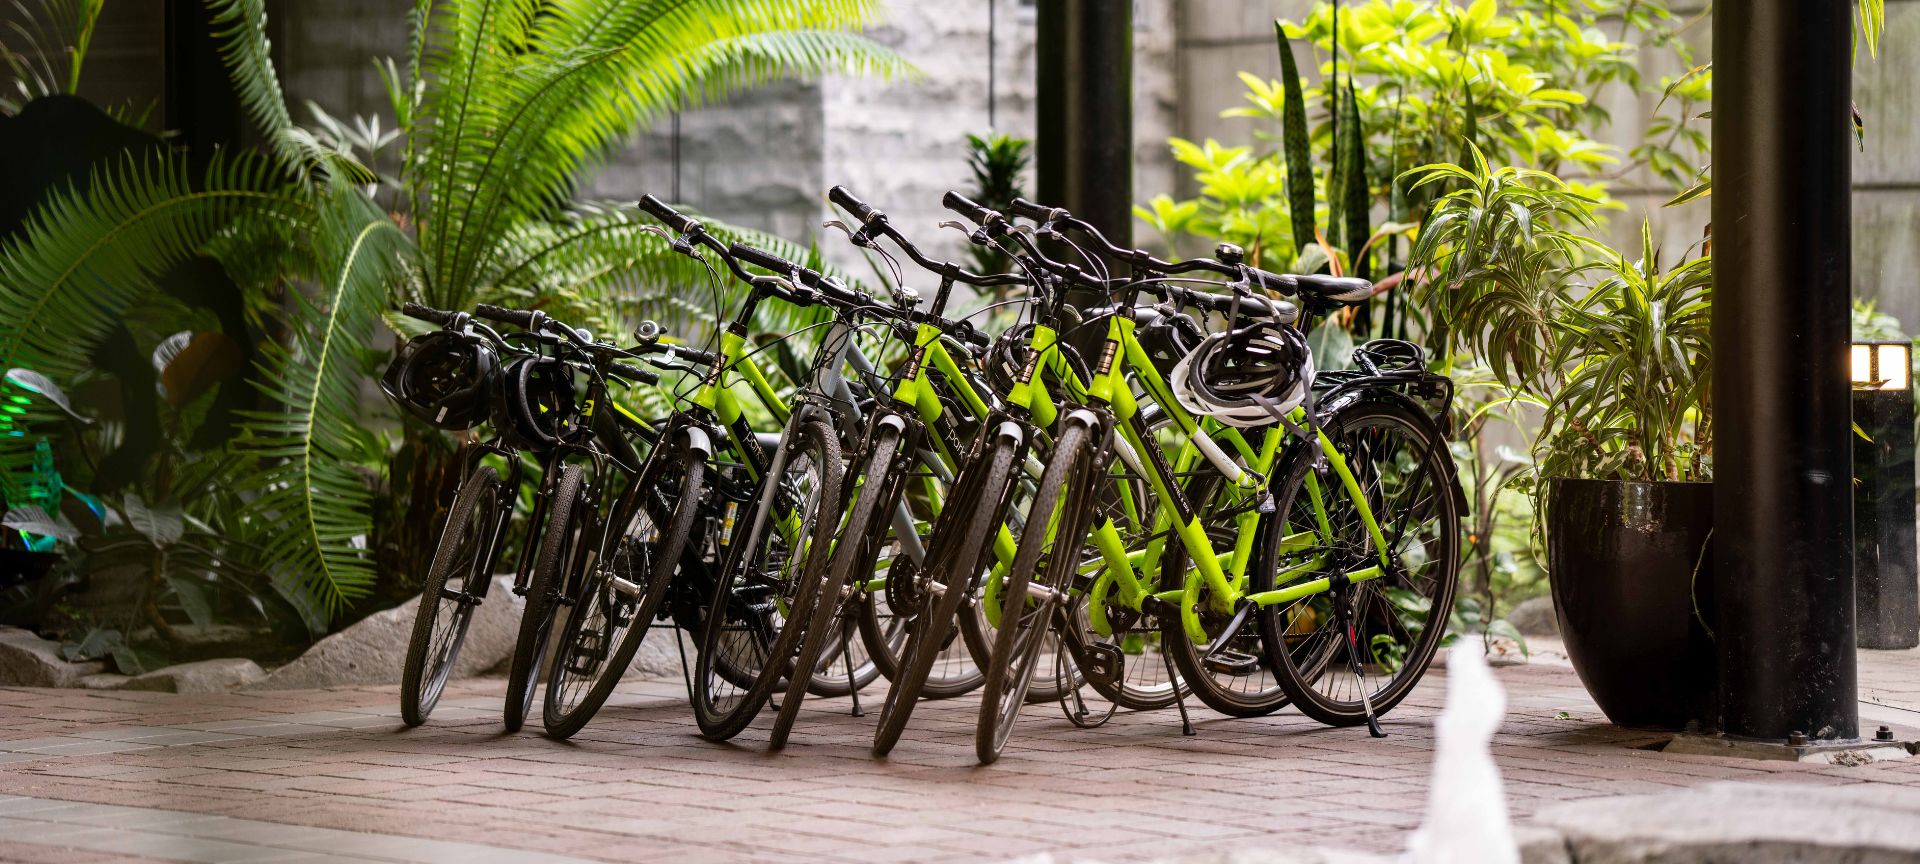 A Group Of Bikes Parked Outside A Building